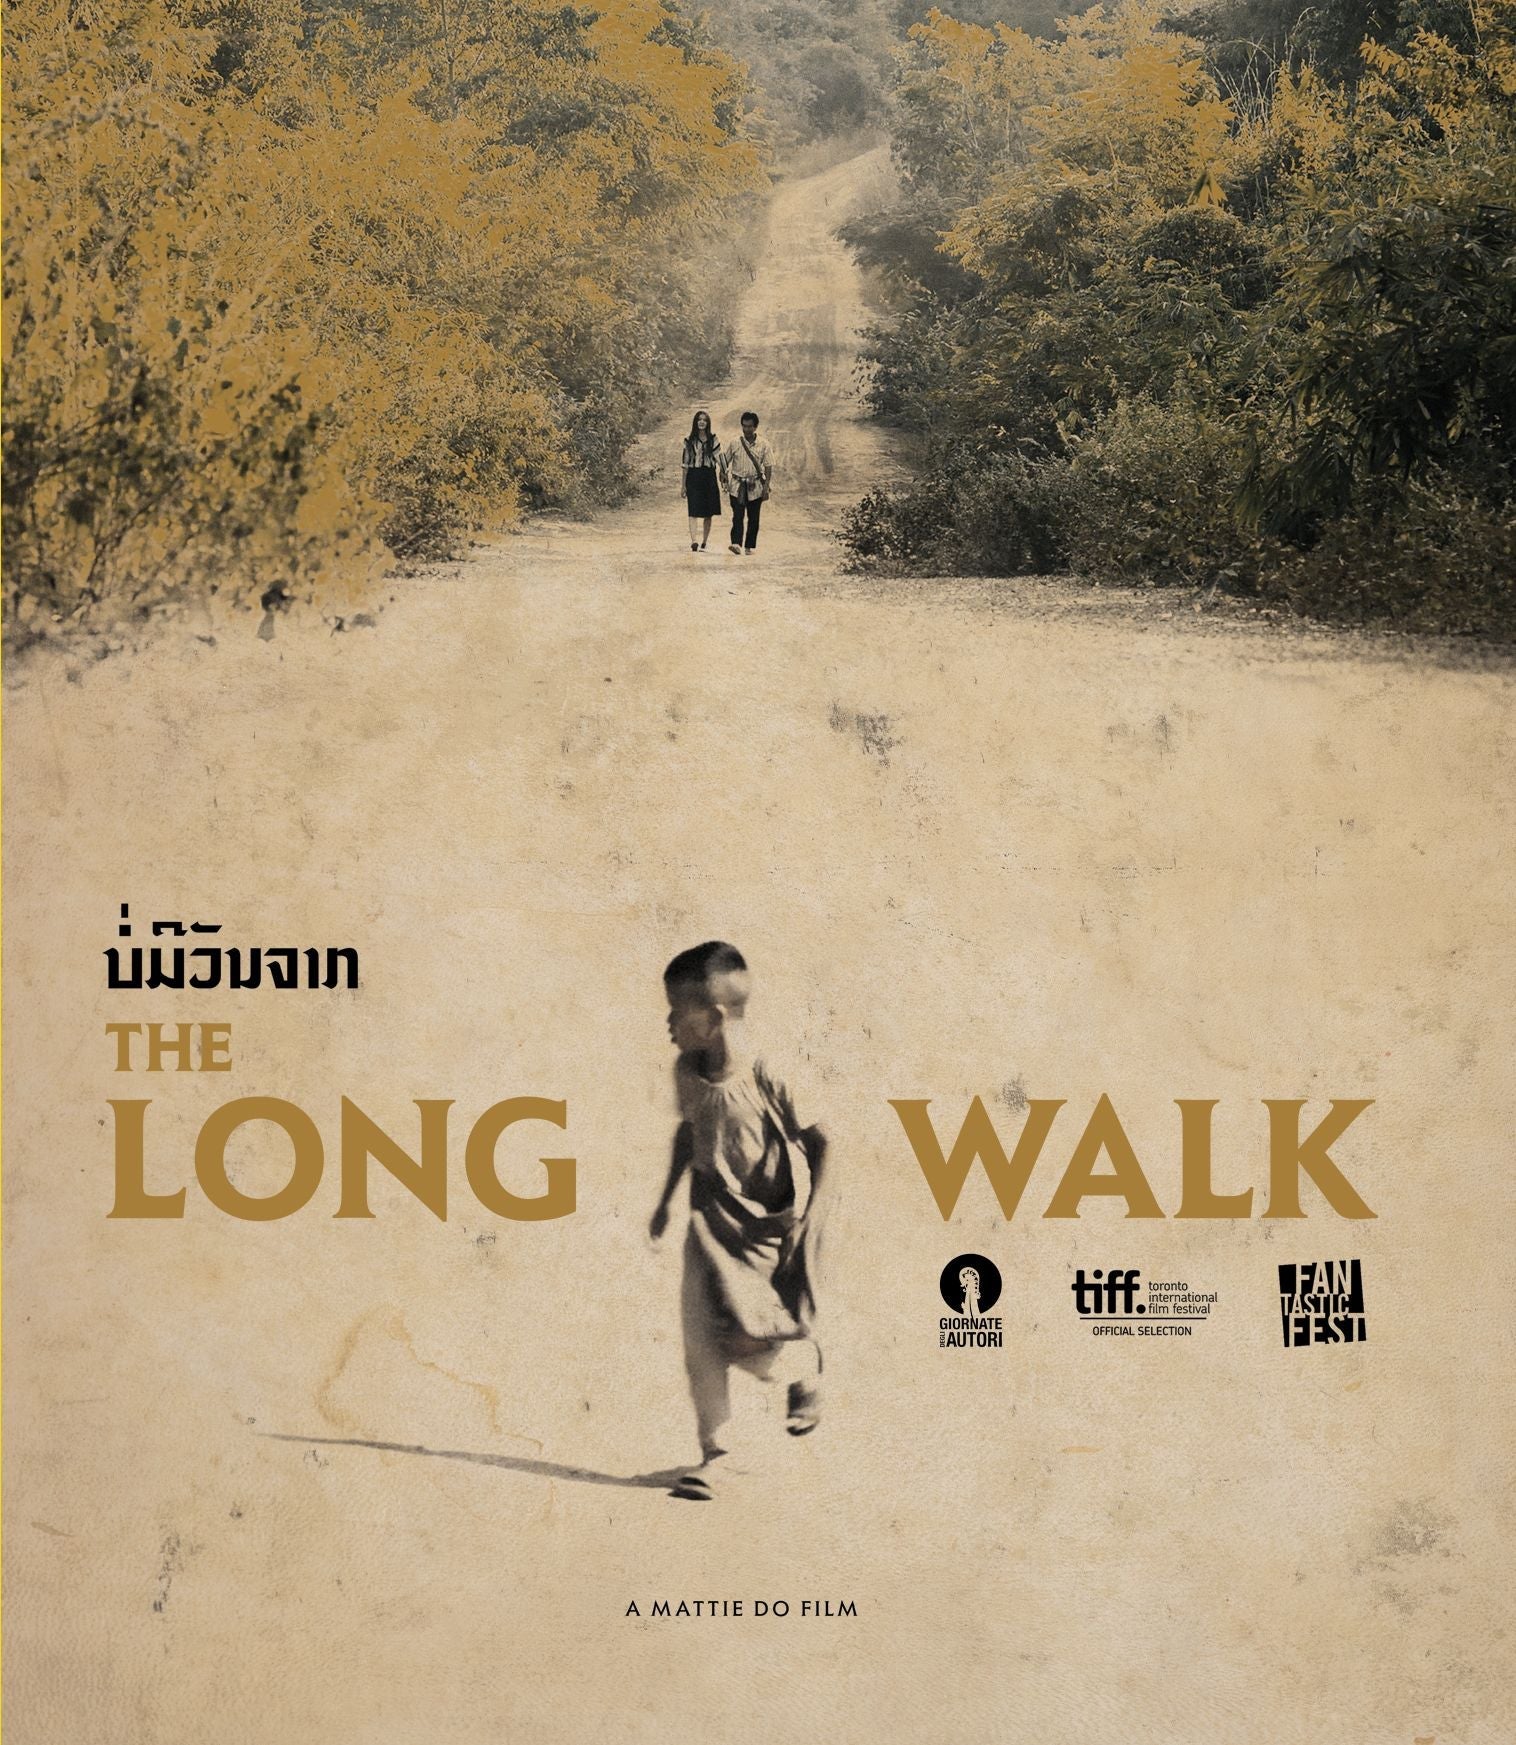 THE LONG WALK (LIMITED EDITION) BLU-RAY